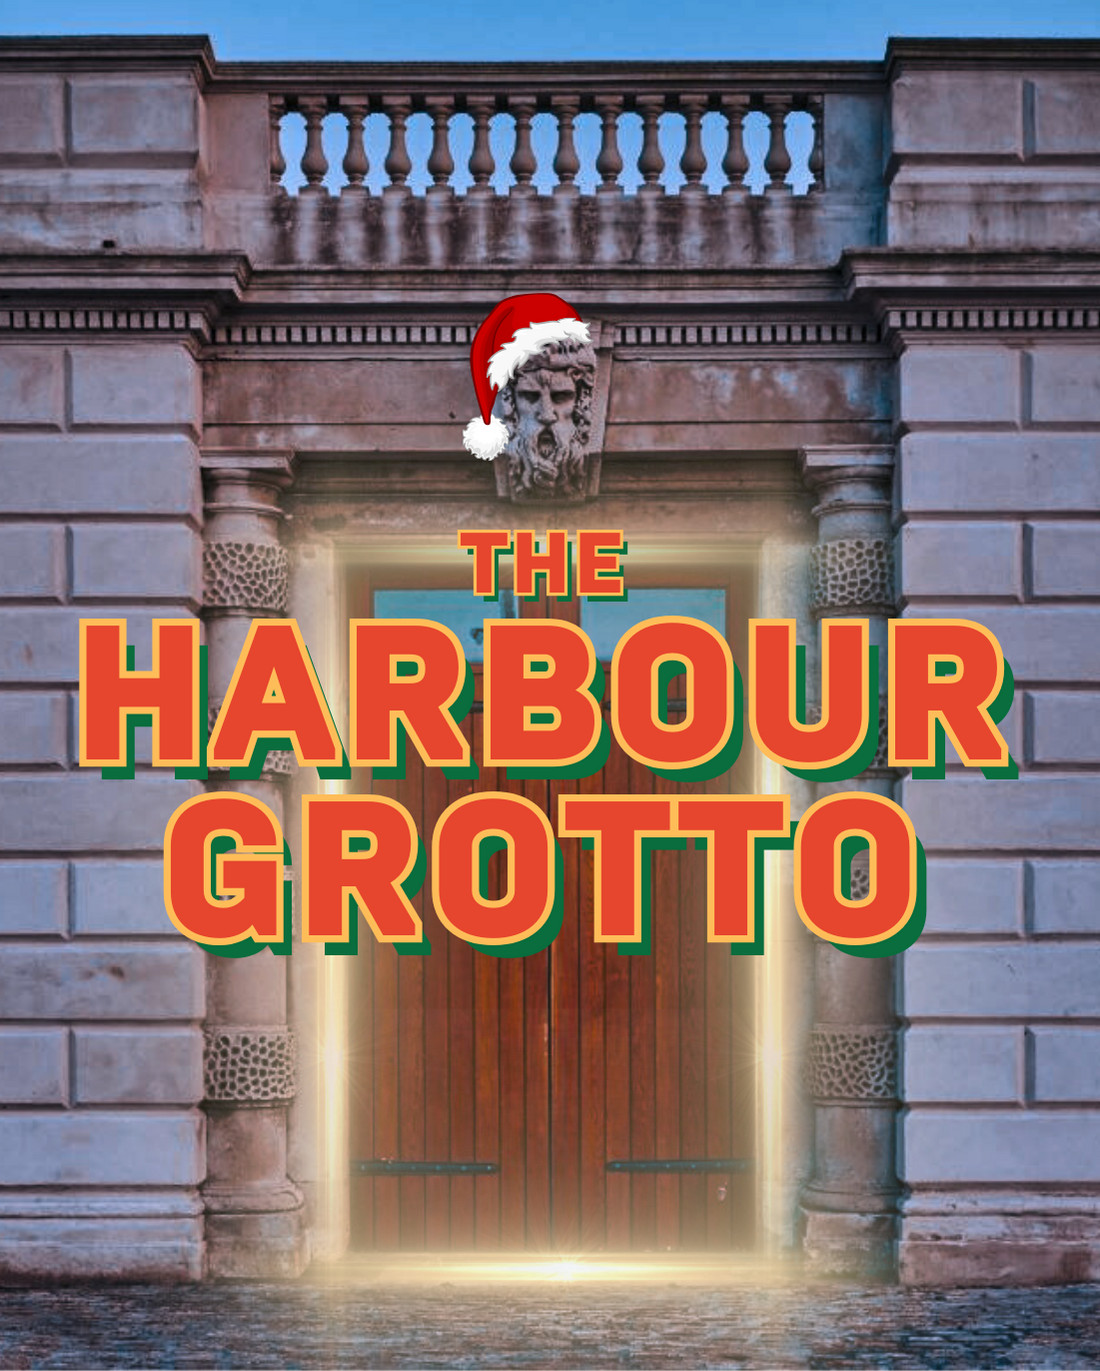 The Harbour Grotto